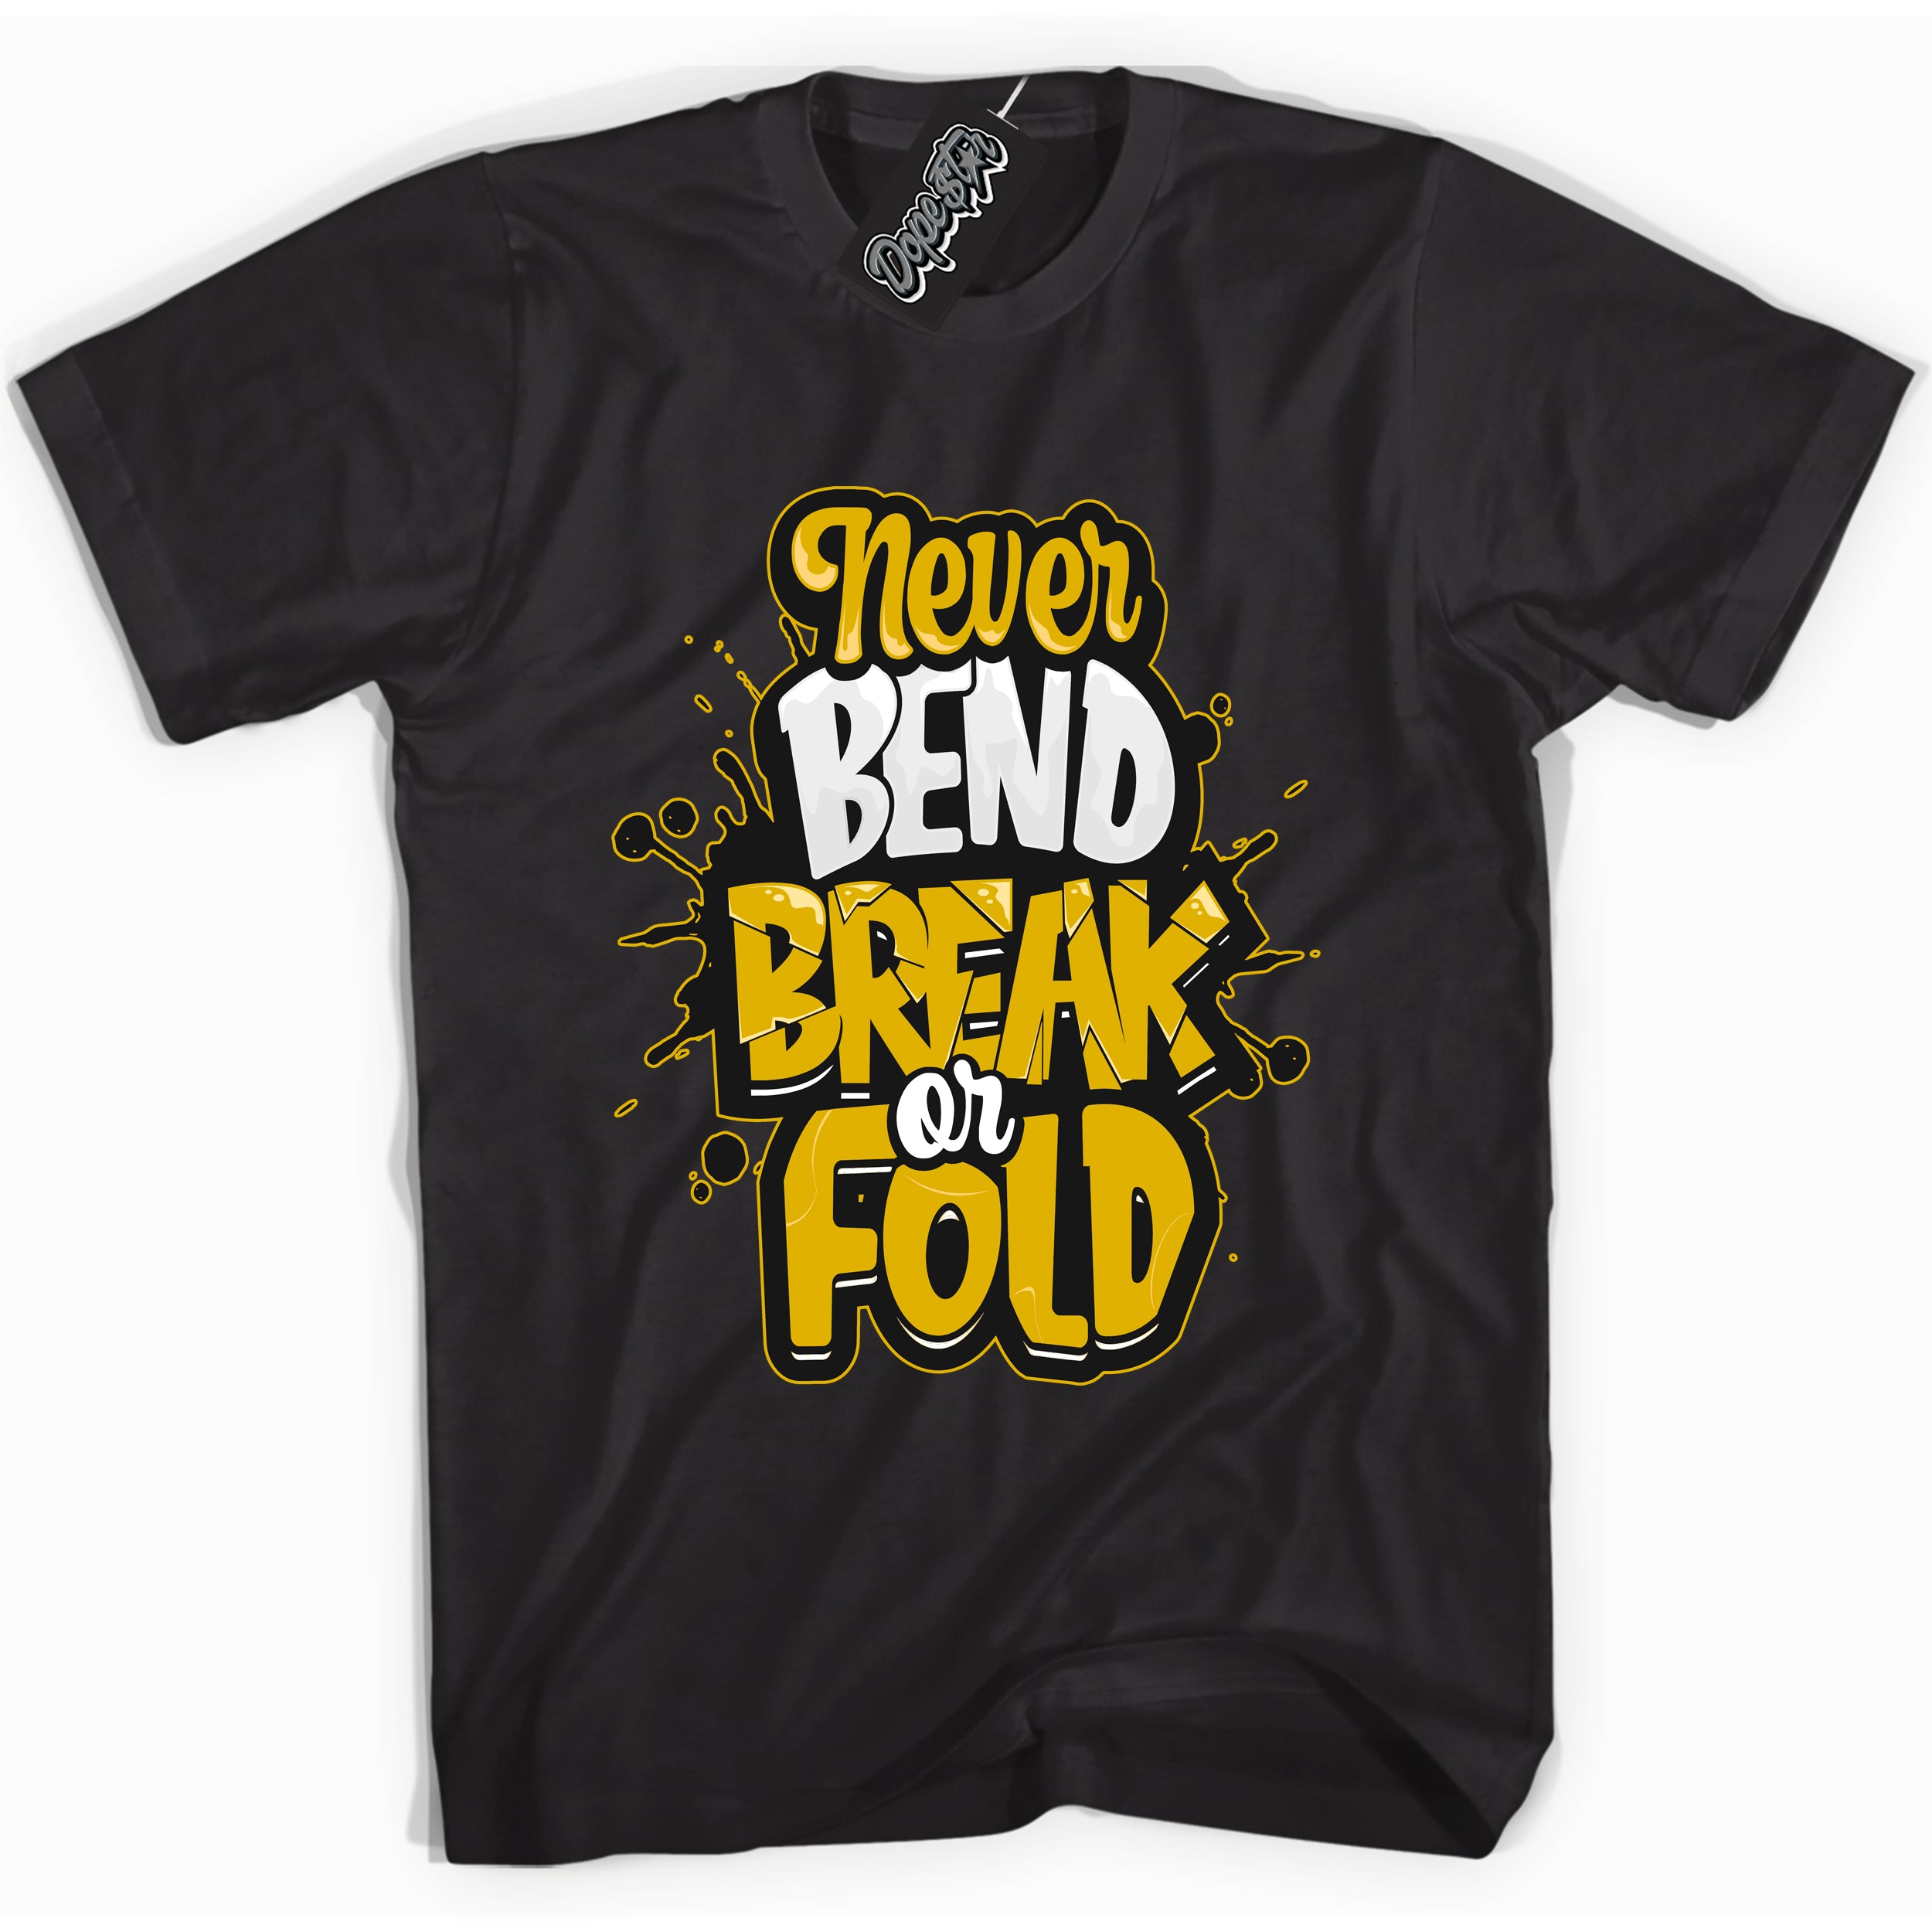 Cool Black Shirt with “ Never Bend Break Or Fold ” design that perfectly matches Yellow Ochre 6s Sneakers.